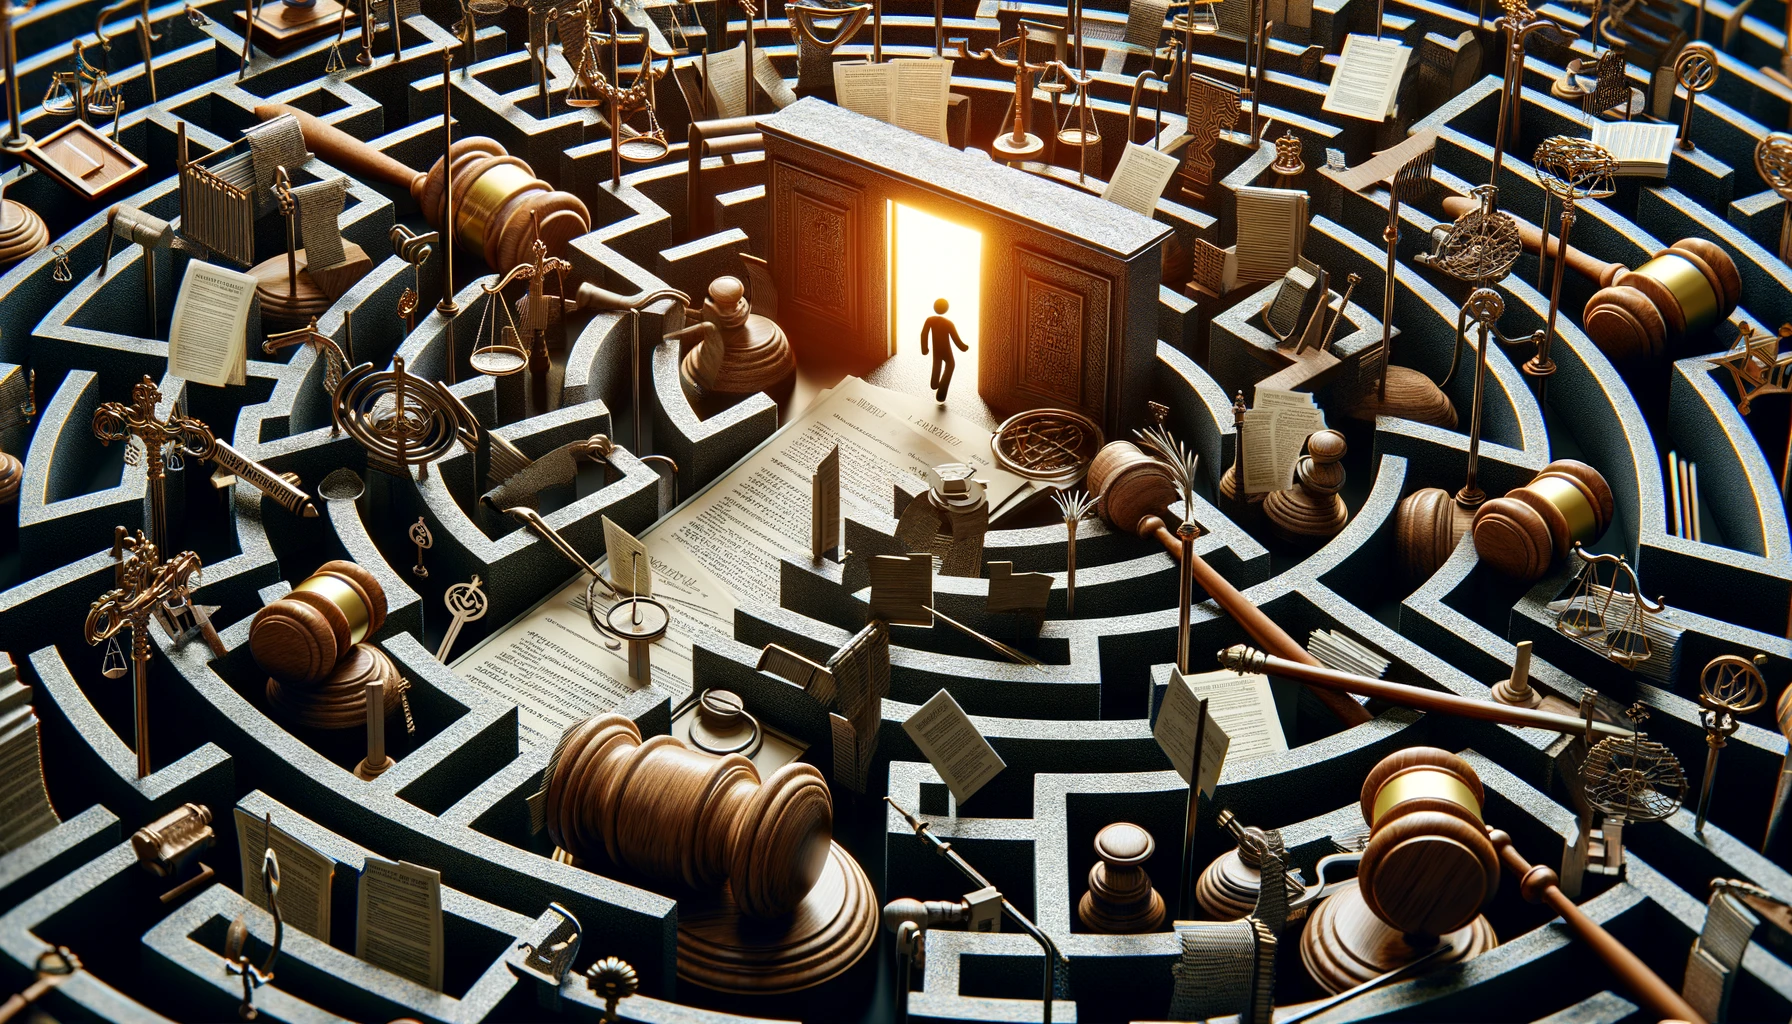 a complex maze constructed from courtroom gavels, legal documents, and judicial symbols, with a small figure navigating towards an exit marked by a glowing light of freedom